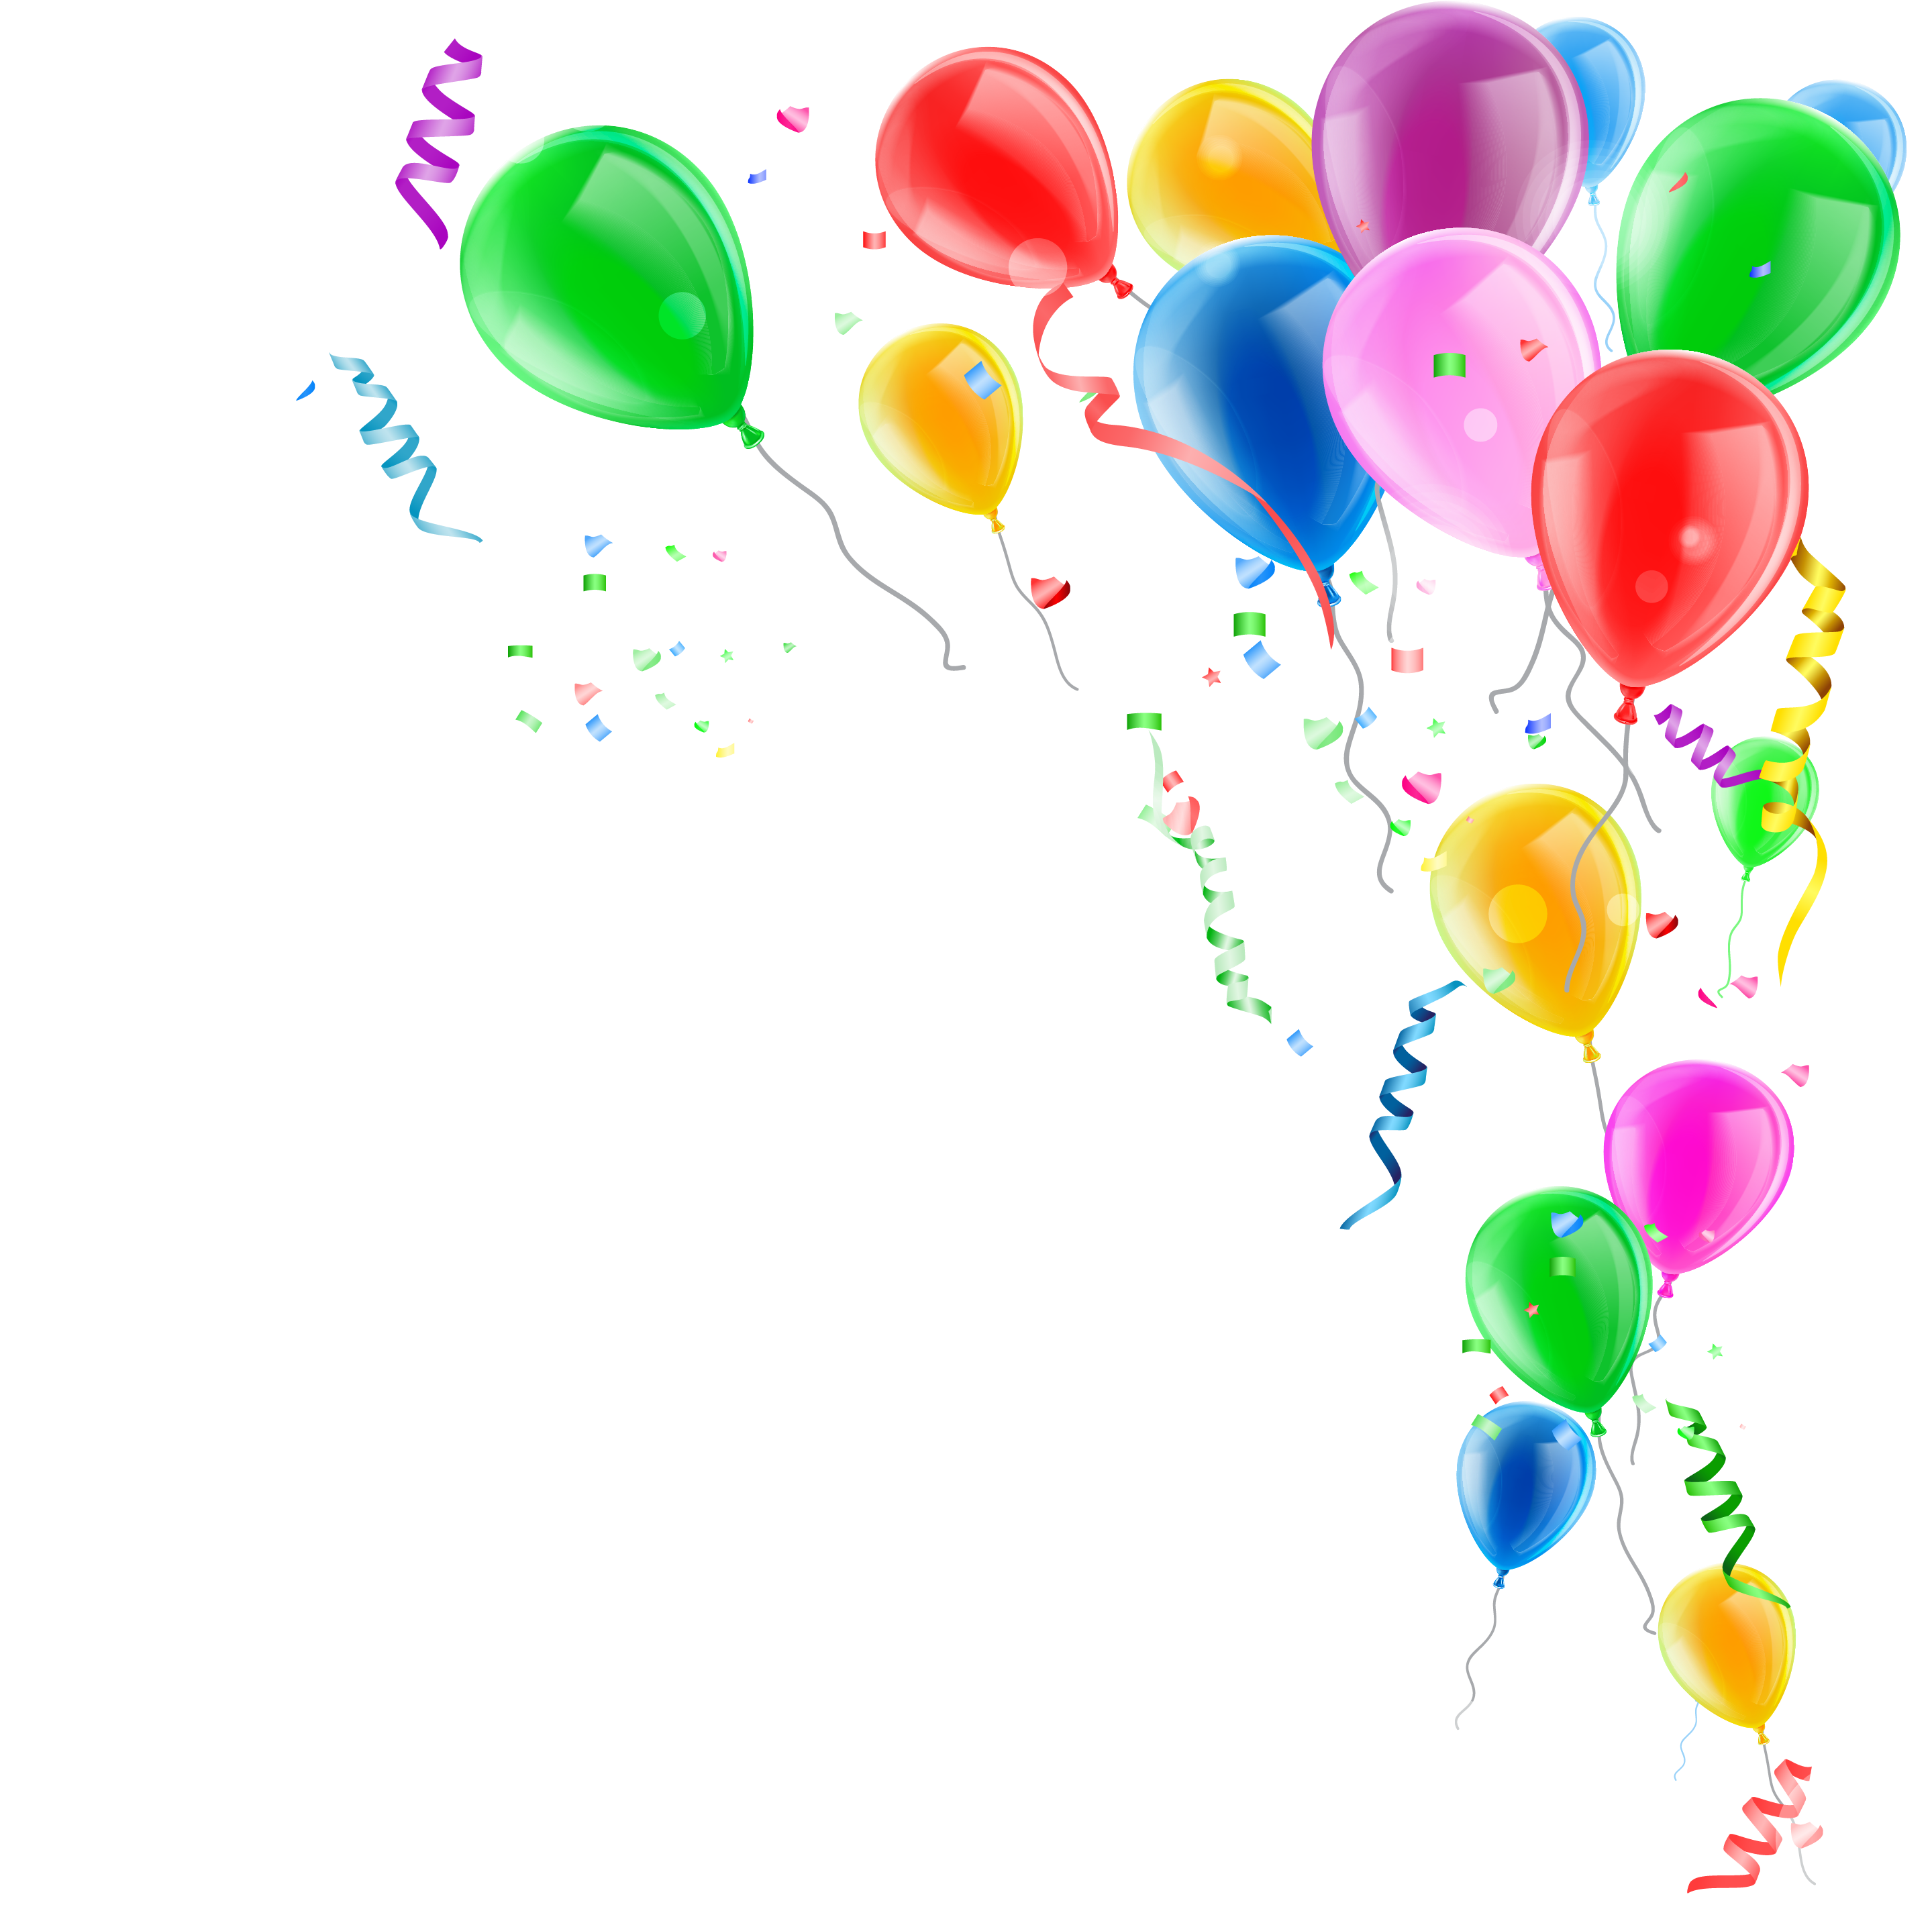 Confetti clipart balloon confetti. Toy balloons and png